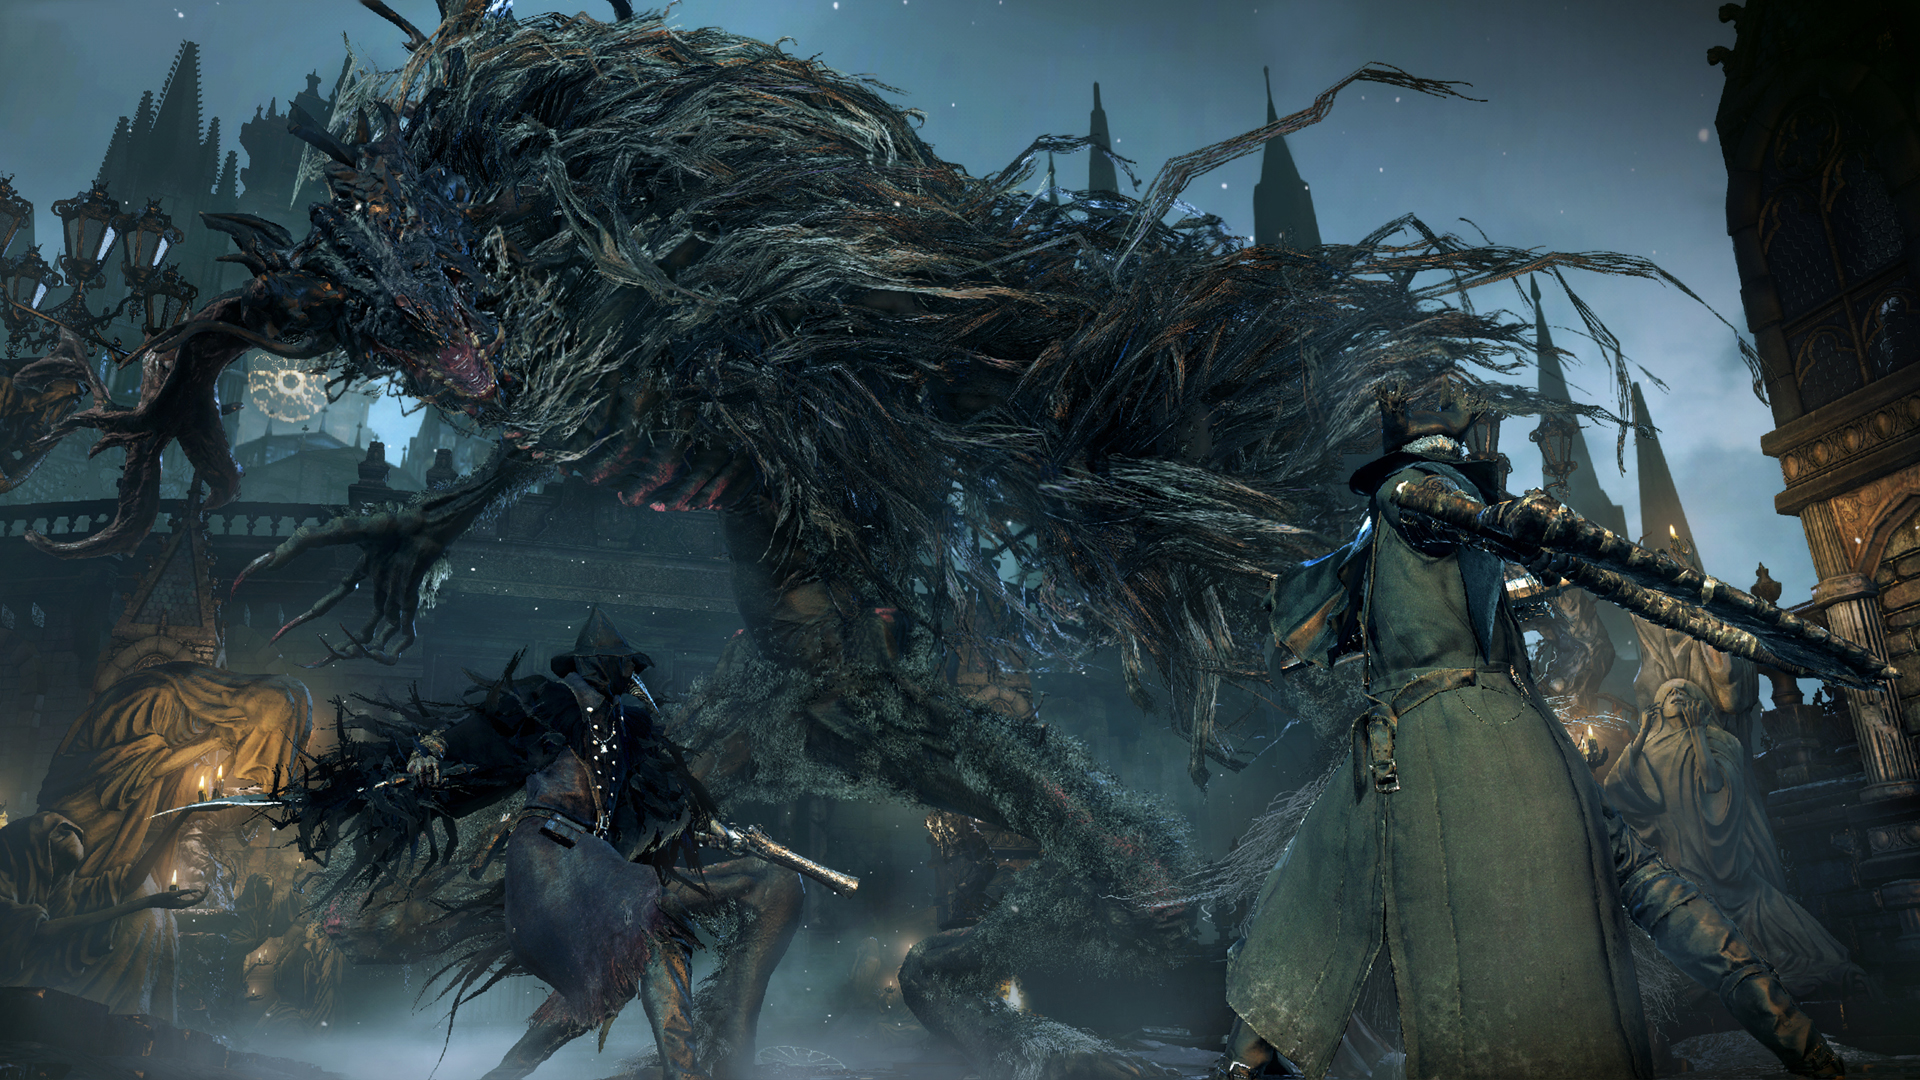 Bloodborne 2 - News and what we'd love to see